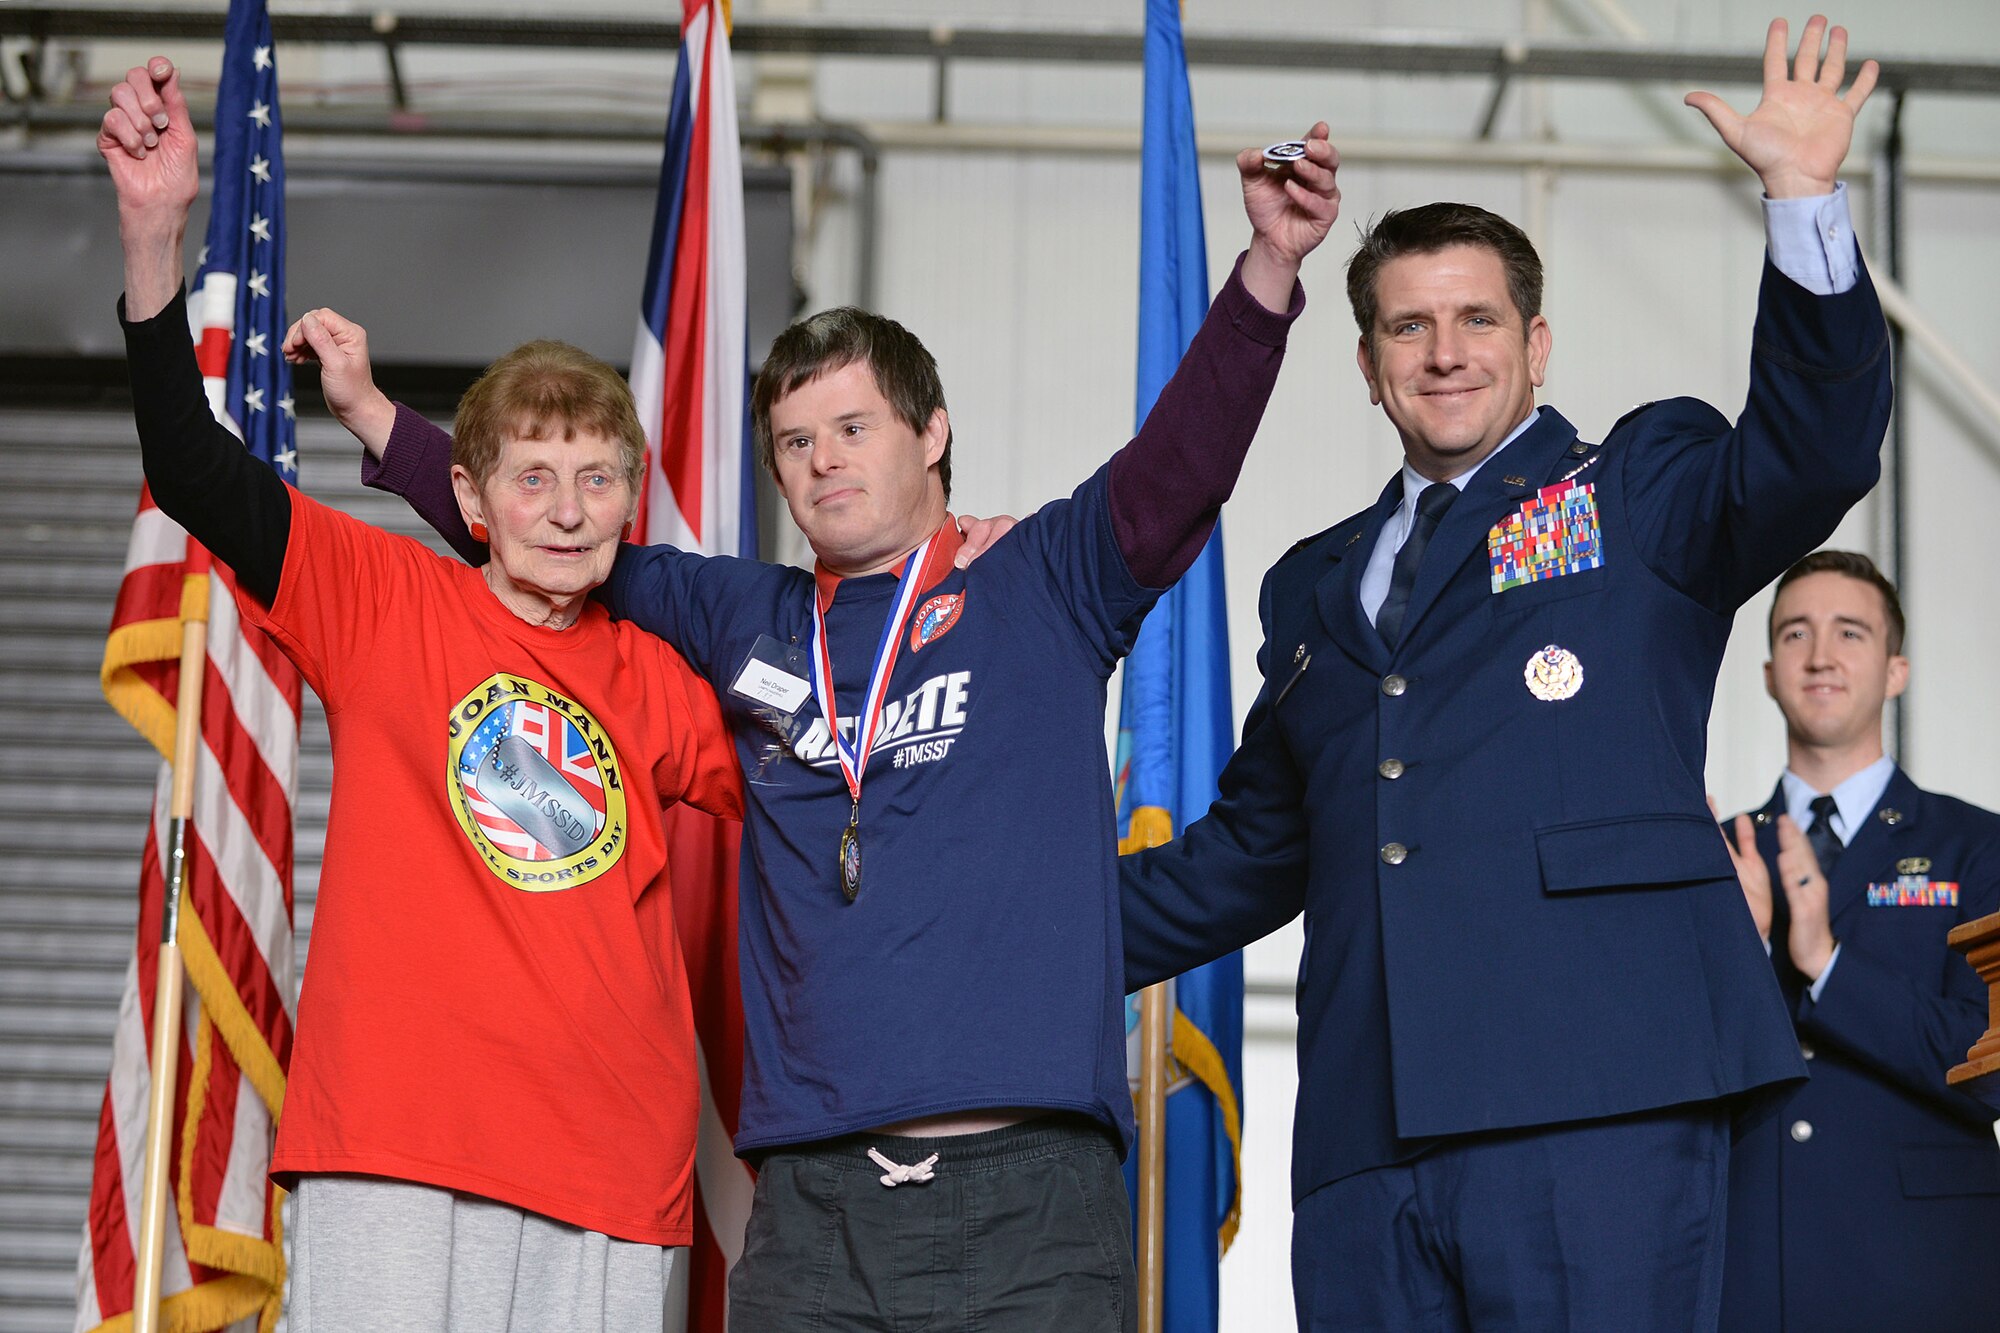 U.S. Air Force Col. Christopher Amrhein, 100th Air Refueling Wing Commander, right, poses for a photograph with special needs athlete Neil Draper, and volunteer and Iris Weimer, during the closing ceremony of the 36th annual Joan Mann Special Sports Day, Sept. 23, 2017, on RAF Mildenhall, England. Draper was recognized by Amrhein for being the only athlete to have participated in all 36 Joan Mann Special Sports Days events. (U.S. Air Force photo by Senior Airman Christine Groening)